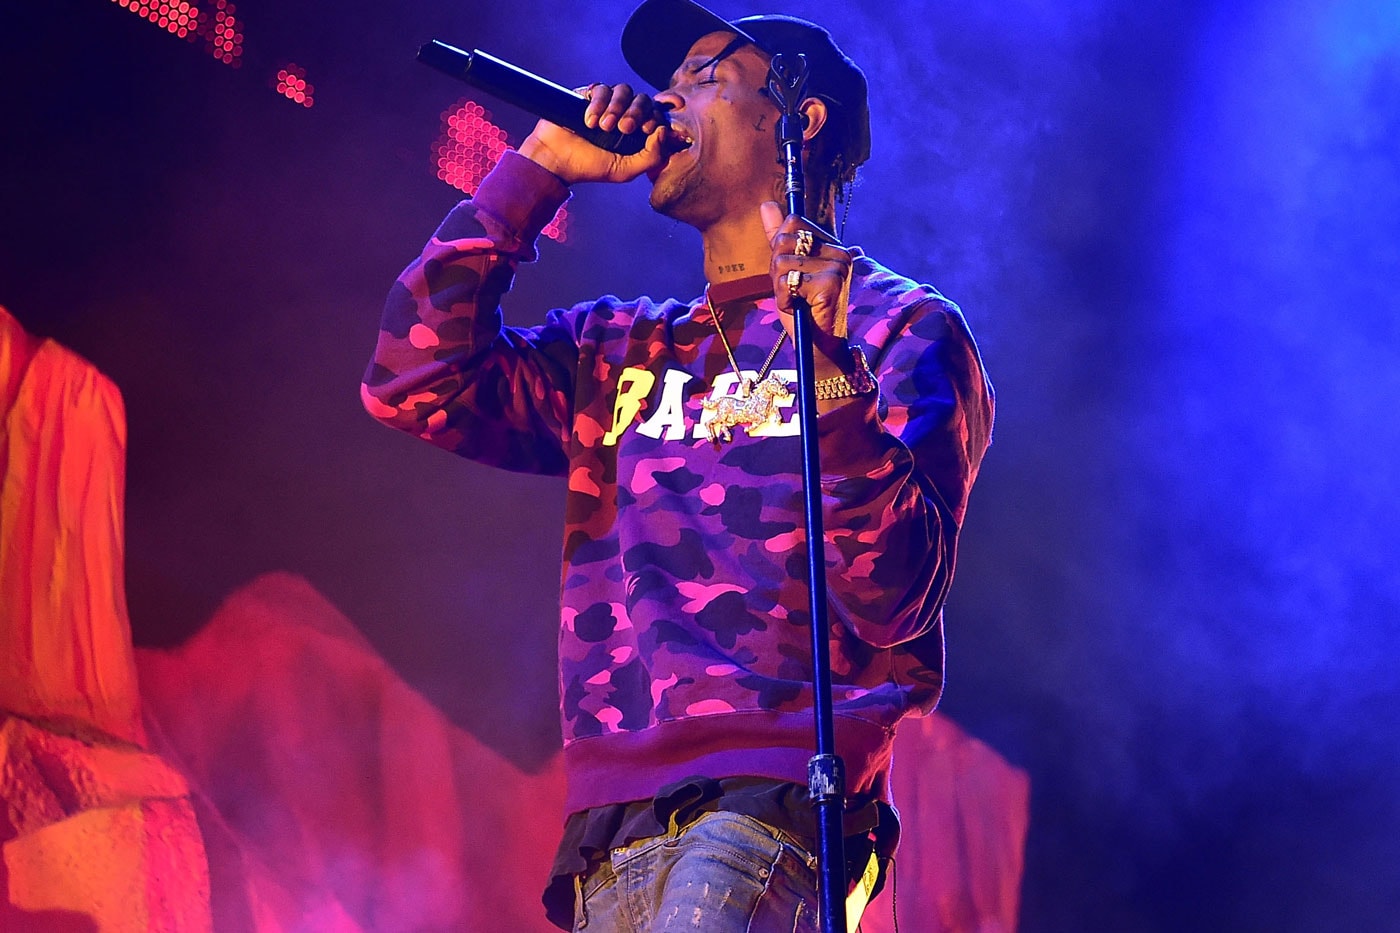 Two New Tracks Leak off Deluxe Edition of Travis Scott's 'Rodeo'